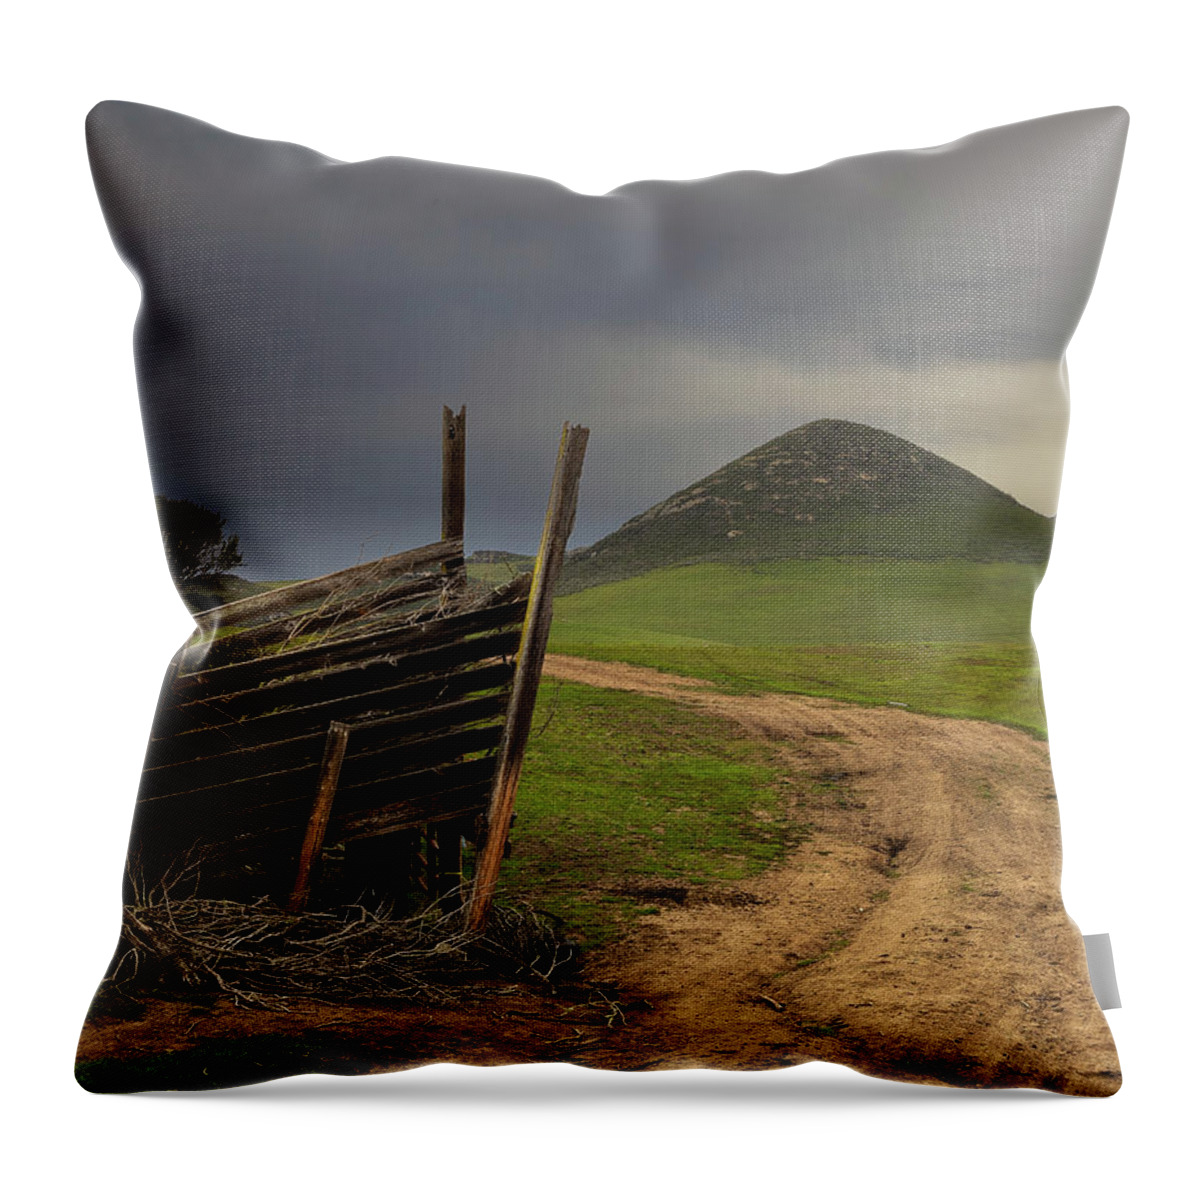 Cattle Throw Pillow featuring the photograph Old cattle chute on Turri Road by Lars Mikkelsen